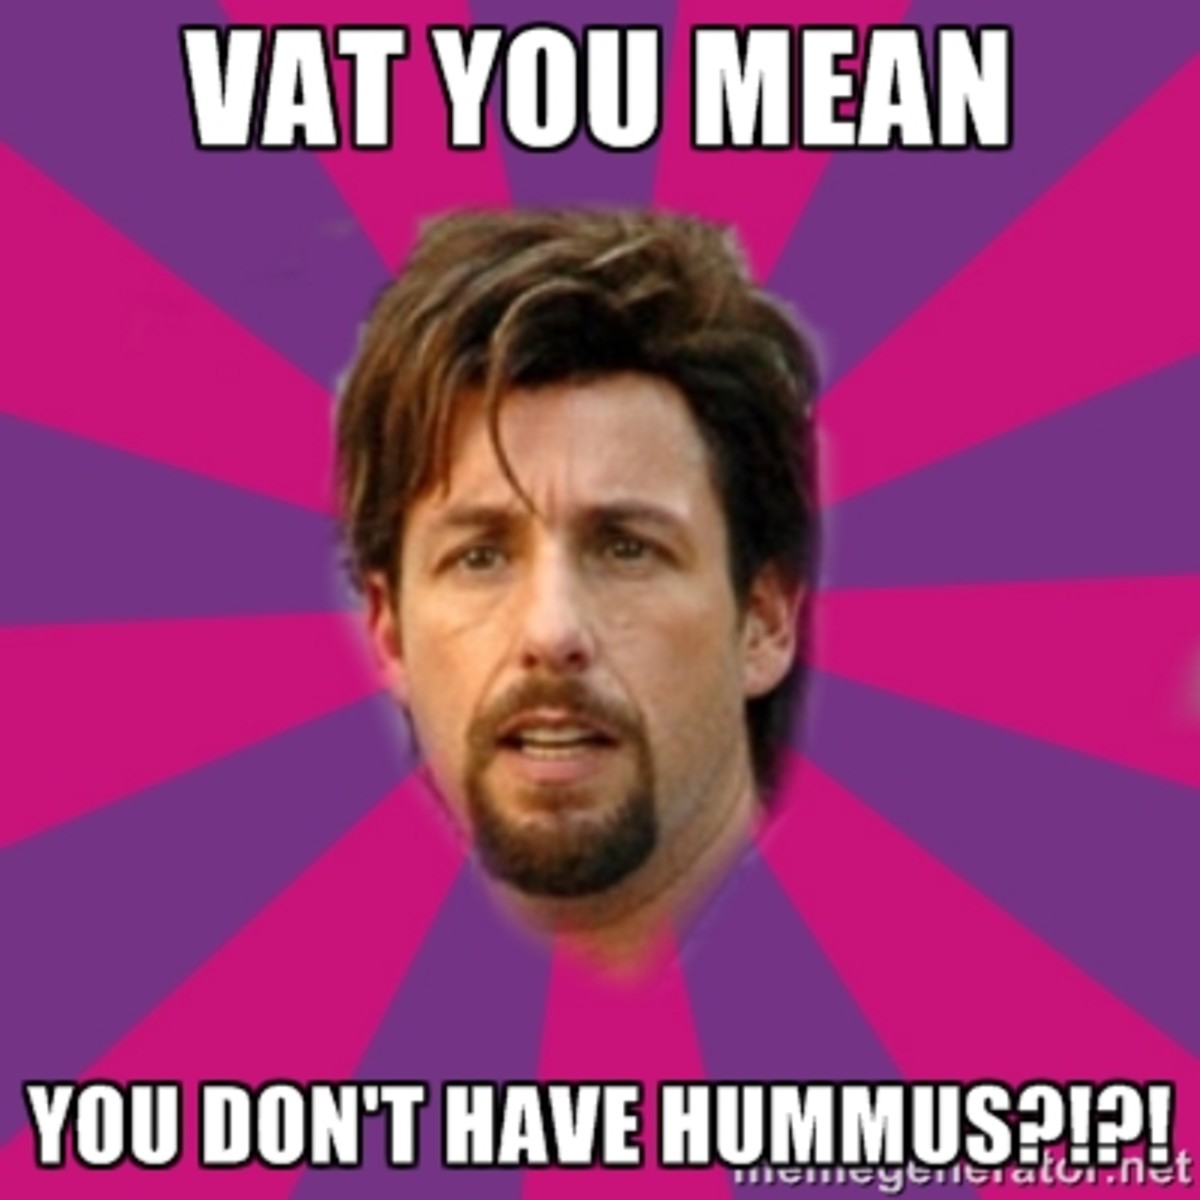 vat you mean you don't have hummus